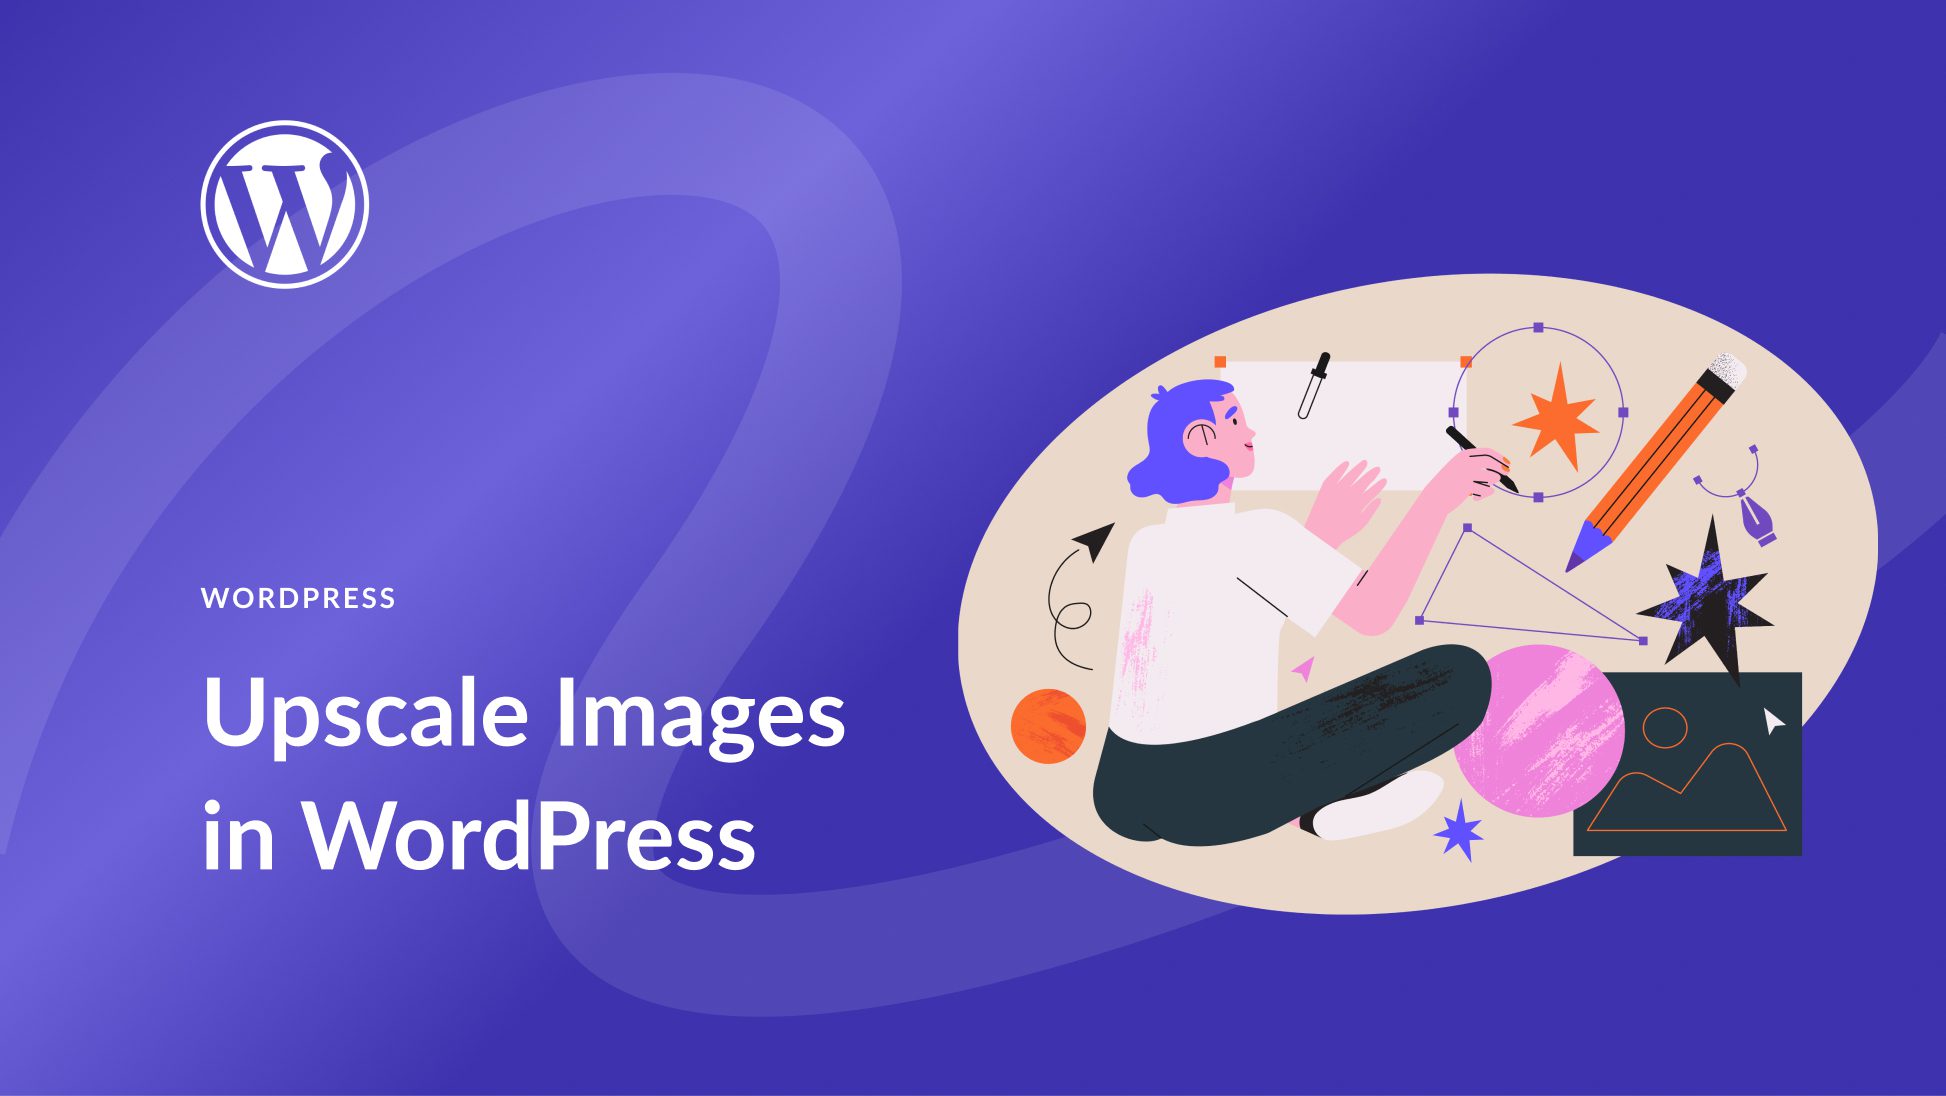 How to Upscale Images in WordPress